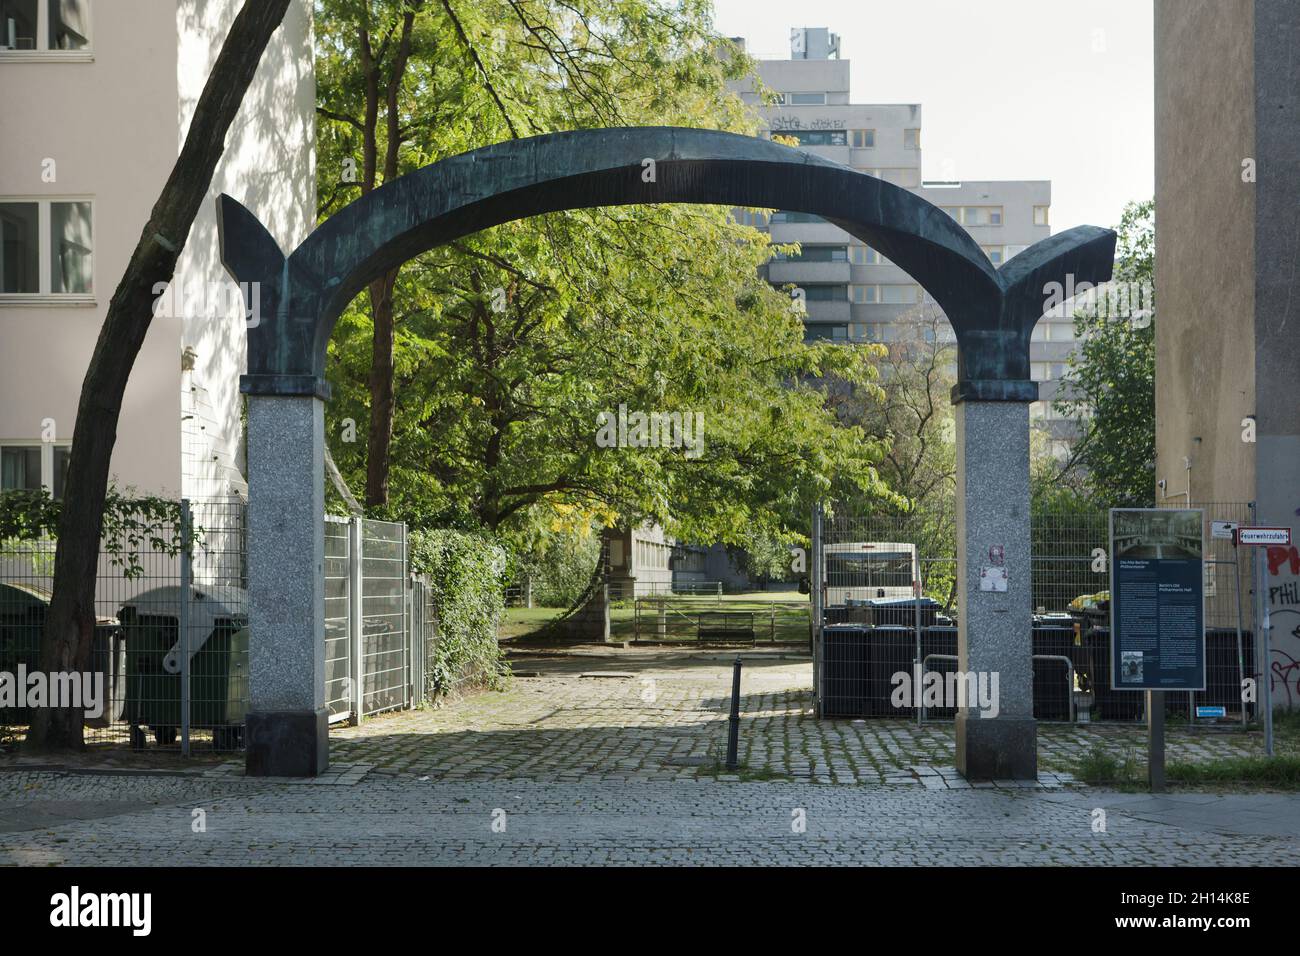 Commemorative archway on the place where the Alte Philharmonie (Old Philharmonic Hall) once stood in Berlin, Germany. The building of the Alte Philharmonie badly damaged during World War II was demolished after the war. Stock Photo